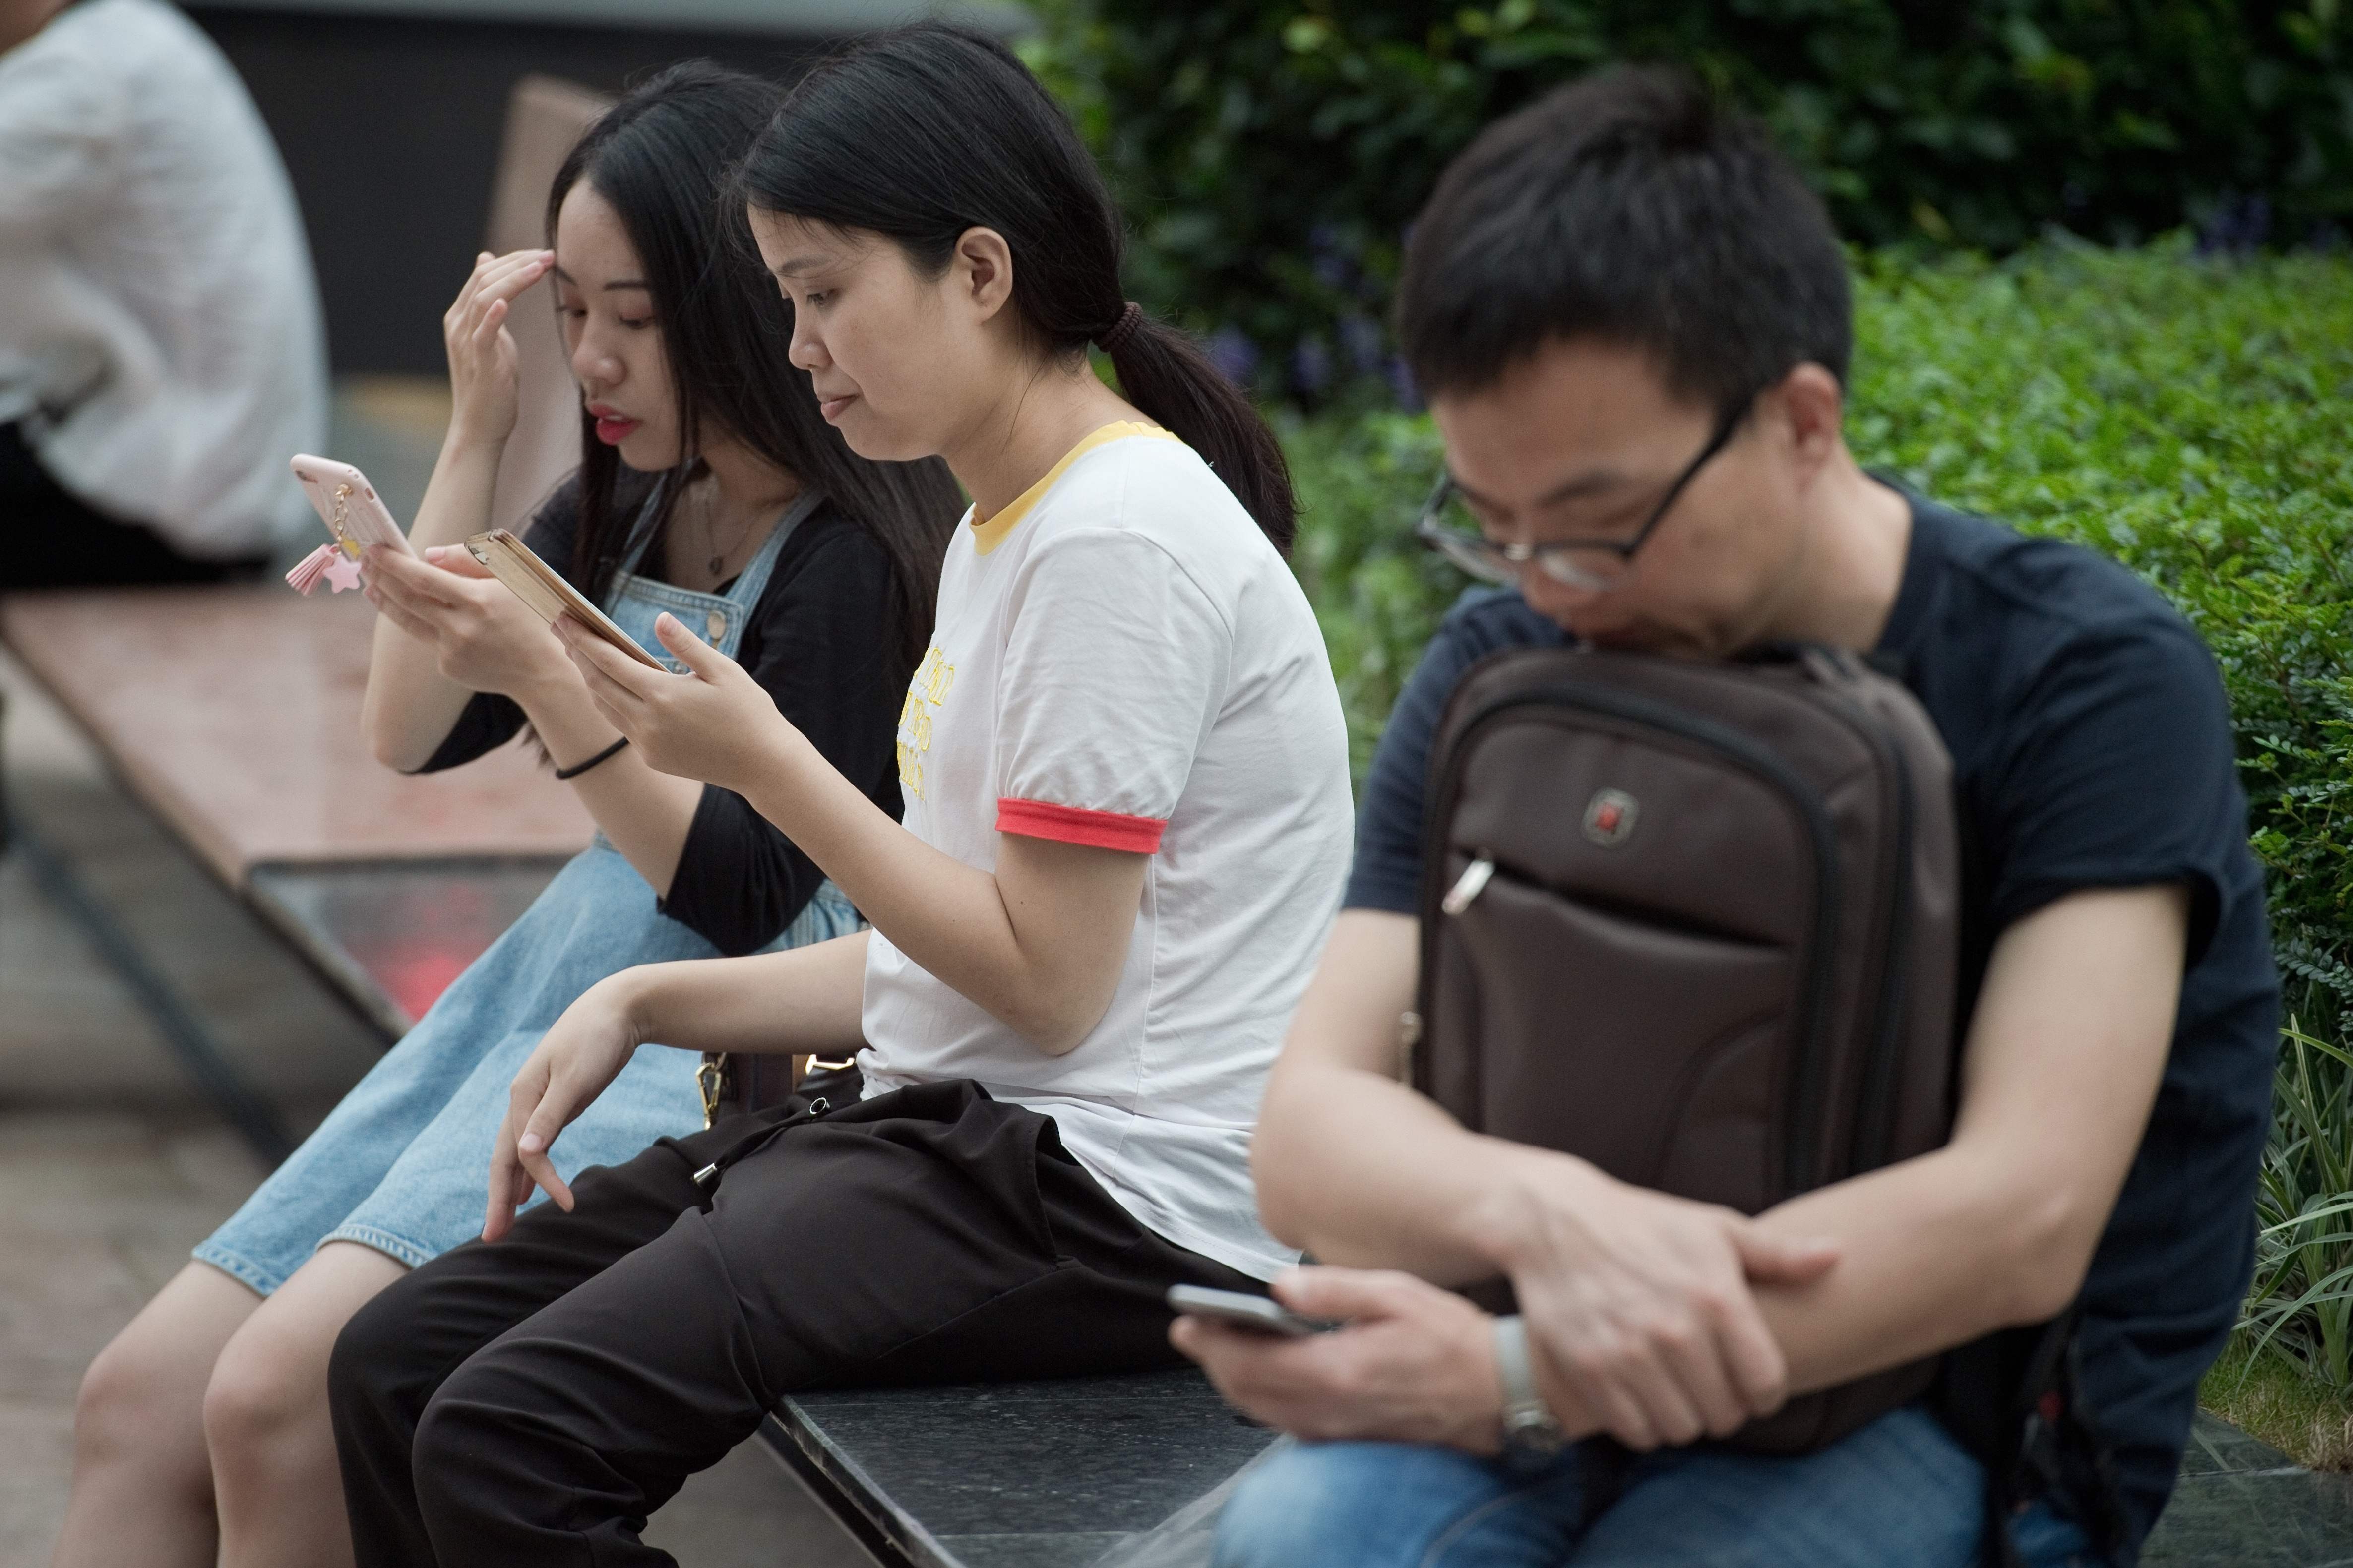 China’s population of smartphone users, numbering more than 730 million, provide a massive supply of data on a daily basis. Photo: AFP